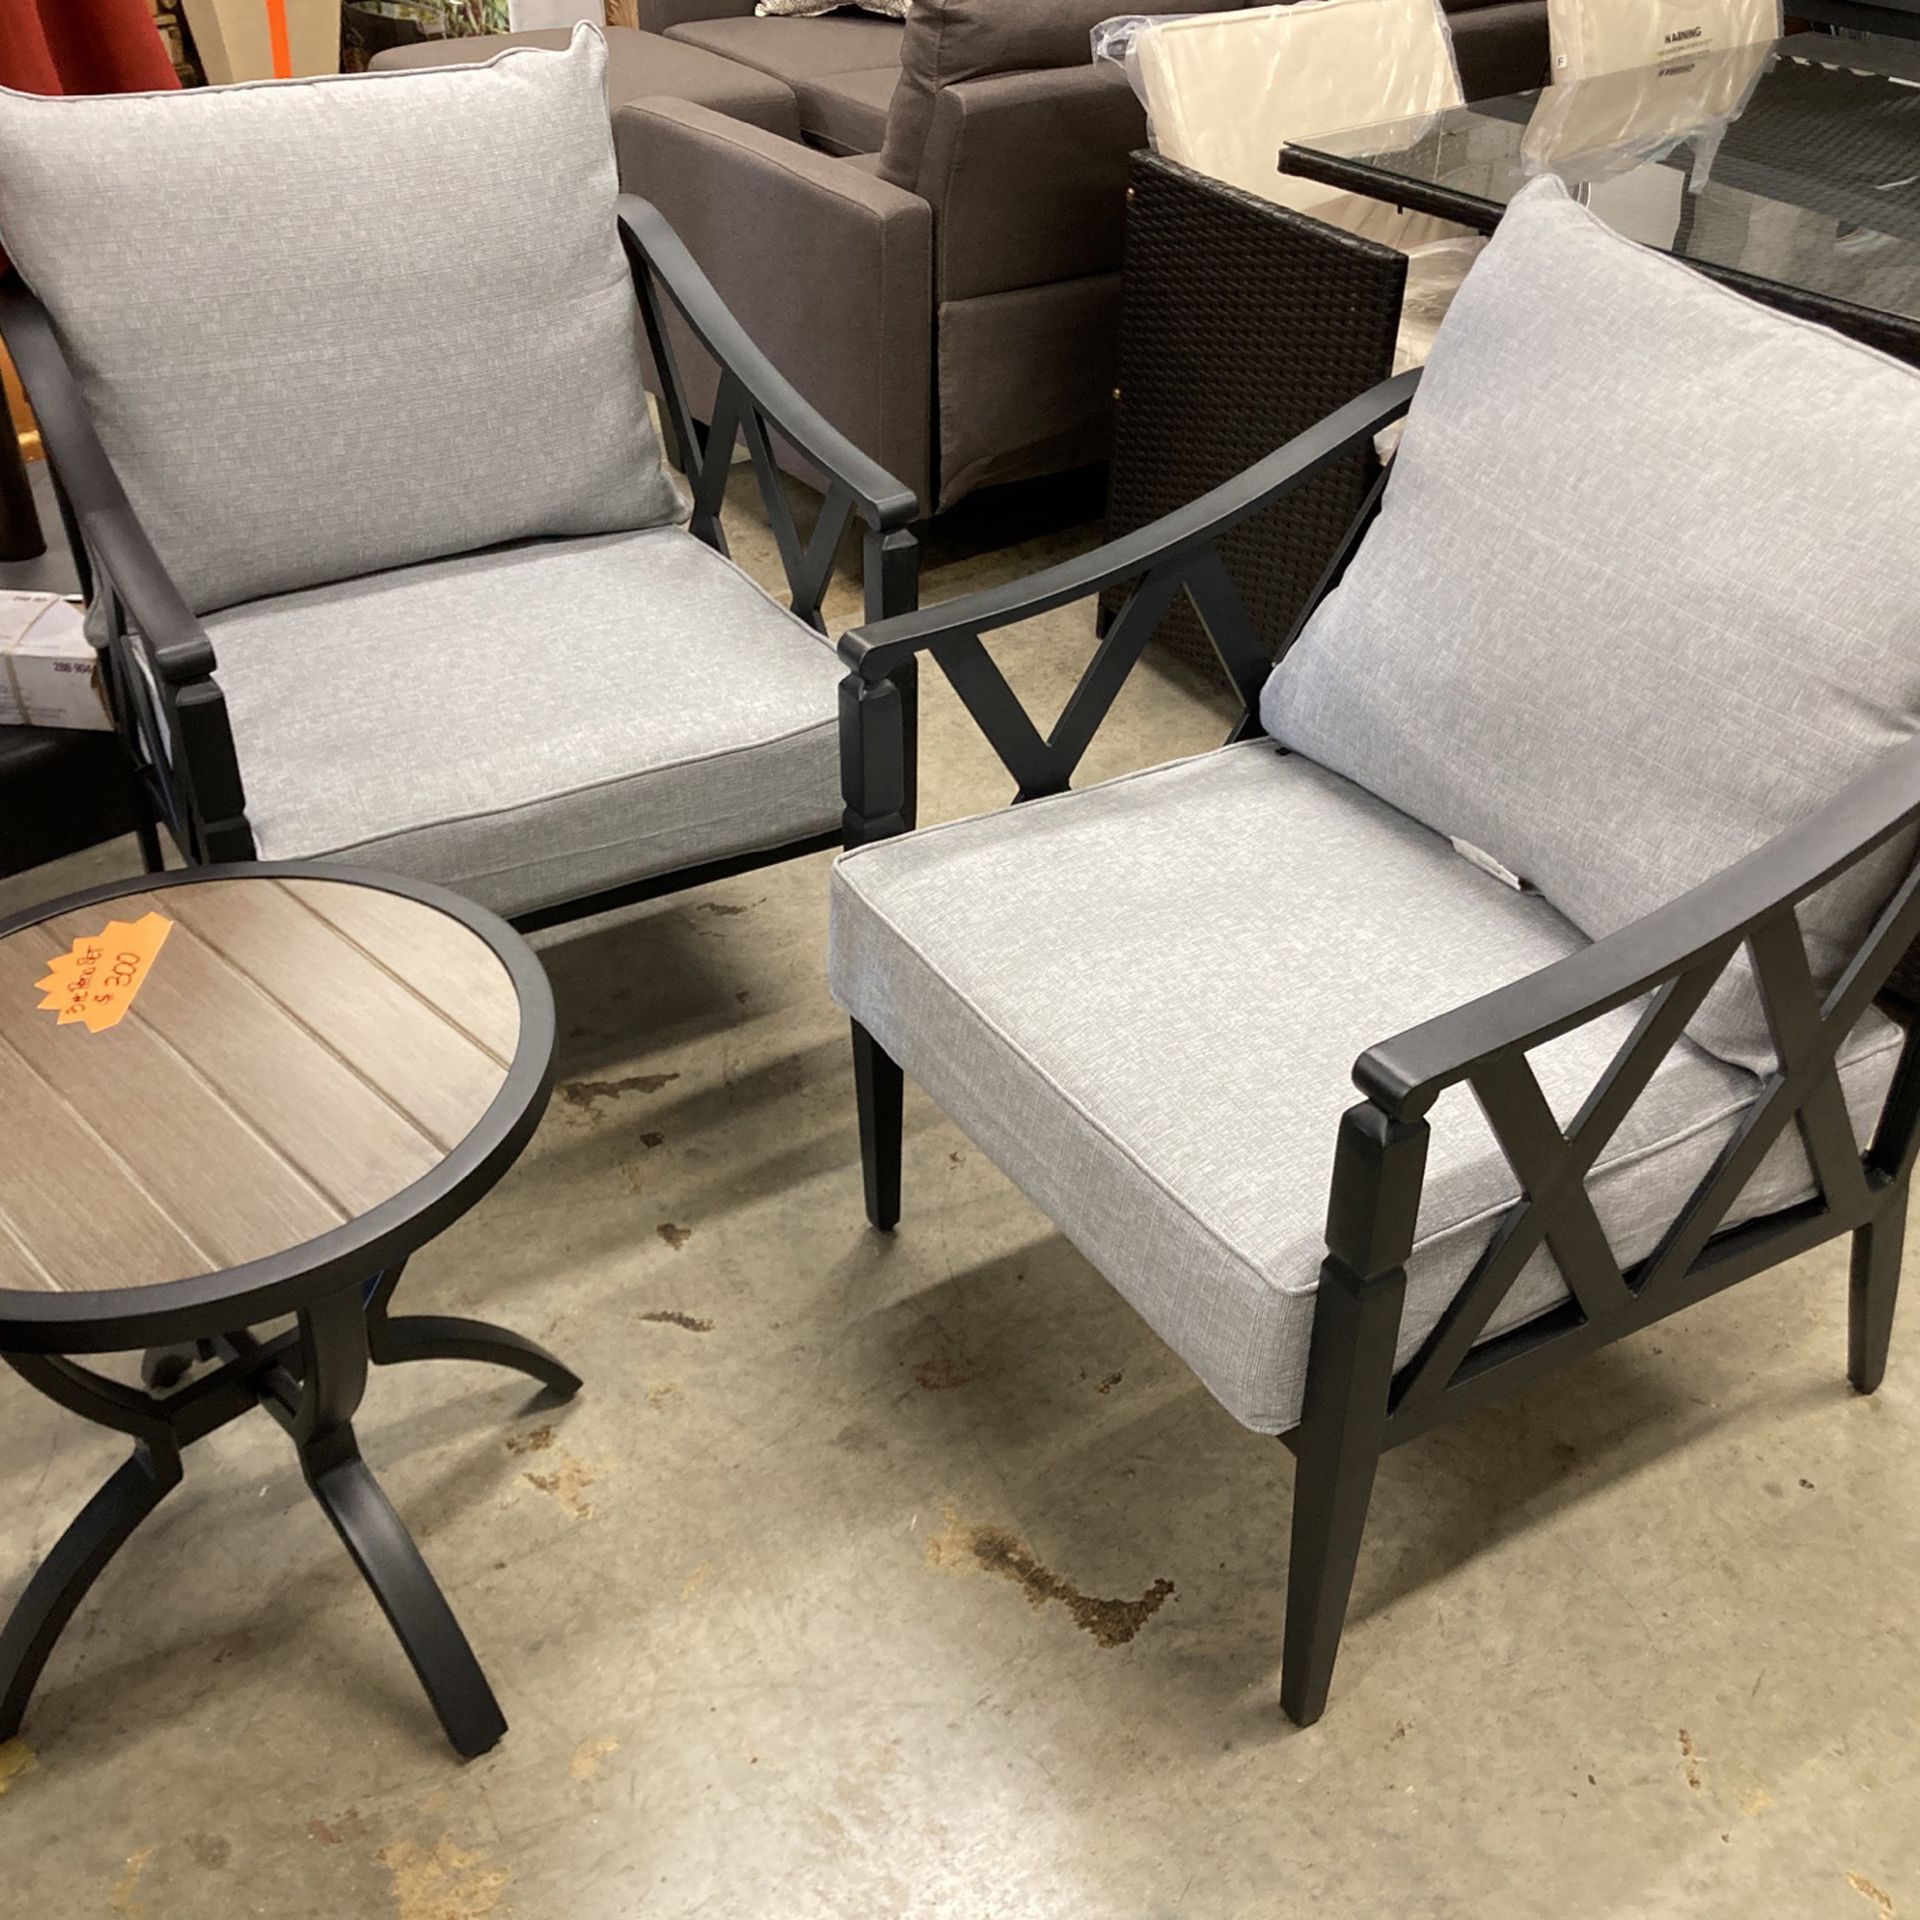 3pc Patio Set - 50% OFF OUTDOOR FURNITURE TODAY ONLY